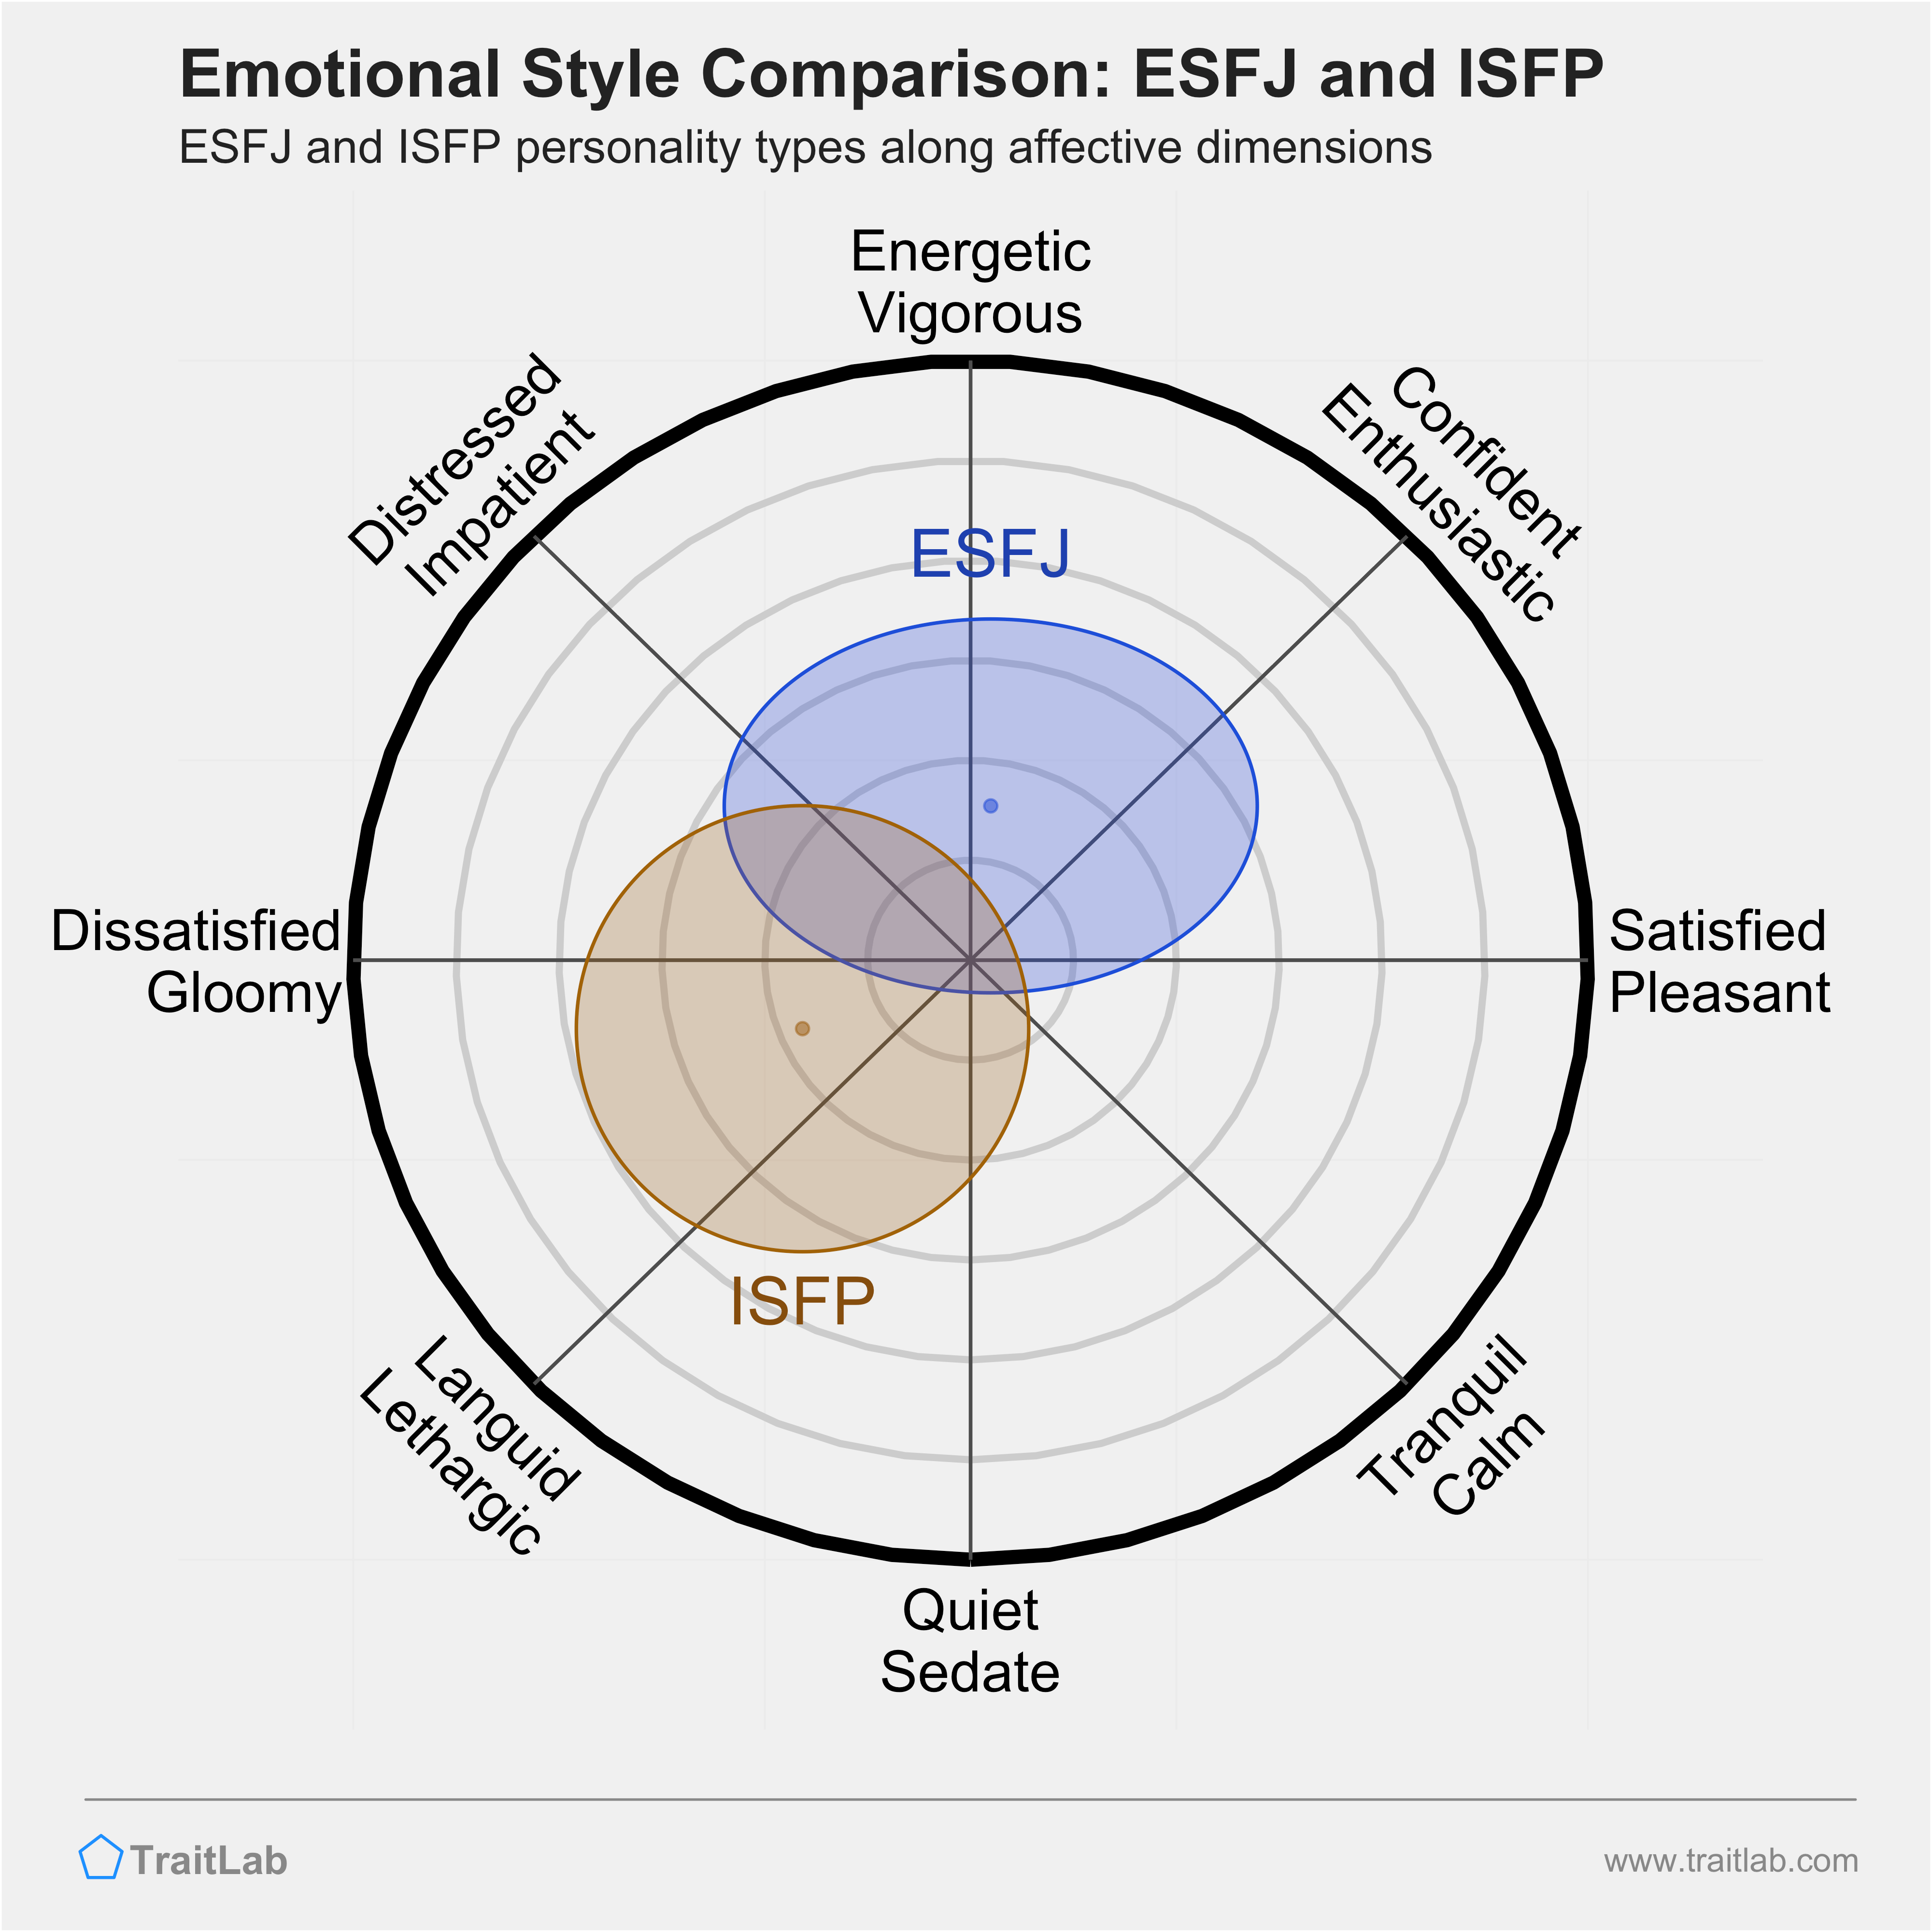 ESFJ and ISFP comparison across emotional (affective) dimensions